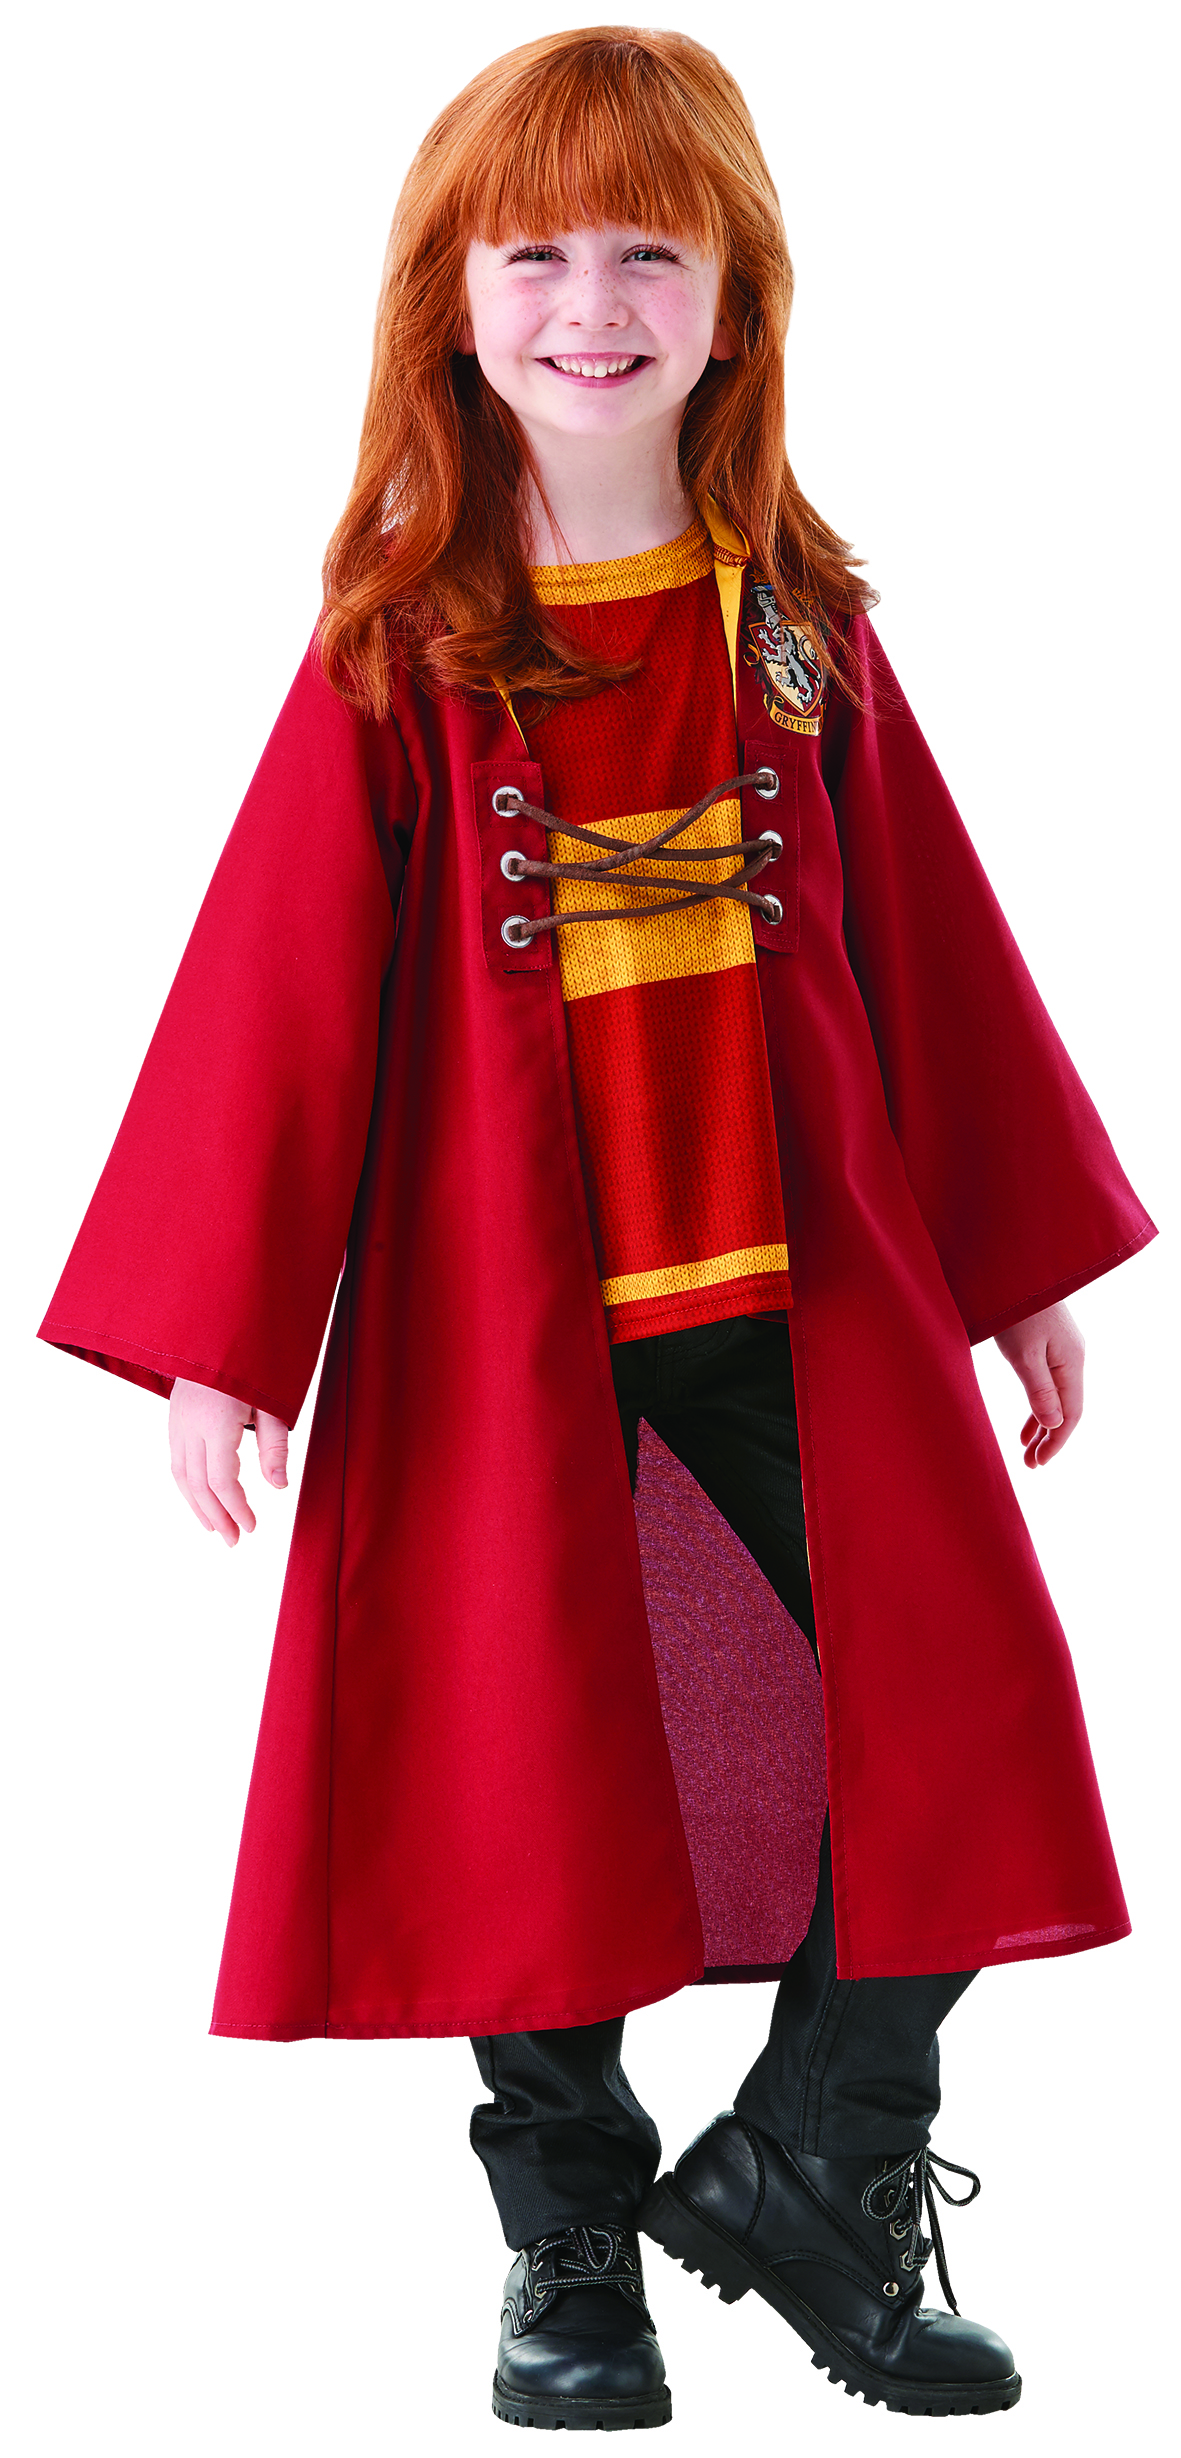 Rubies 3300693 - Harry Potter Quidditch Robe